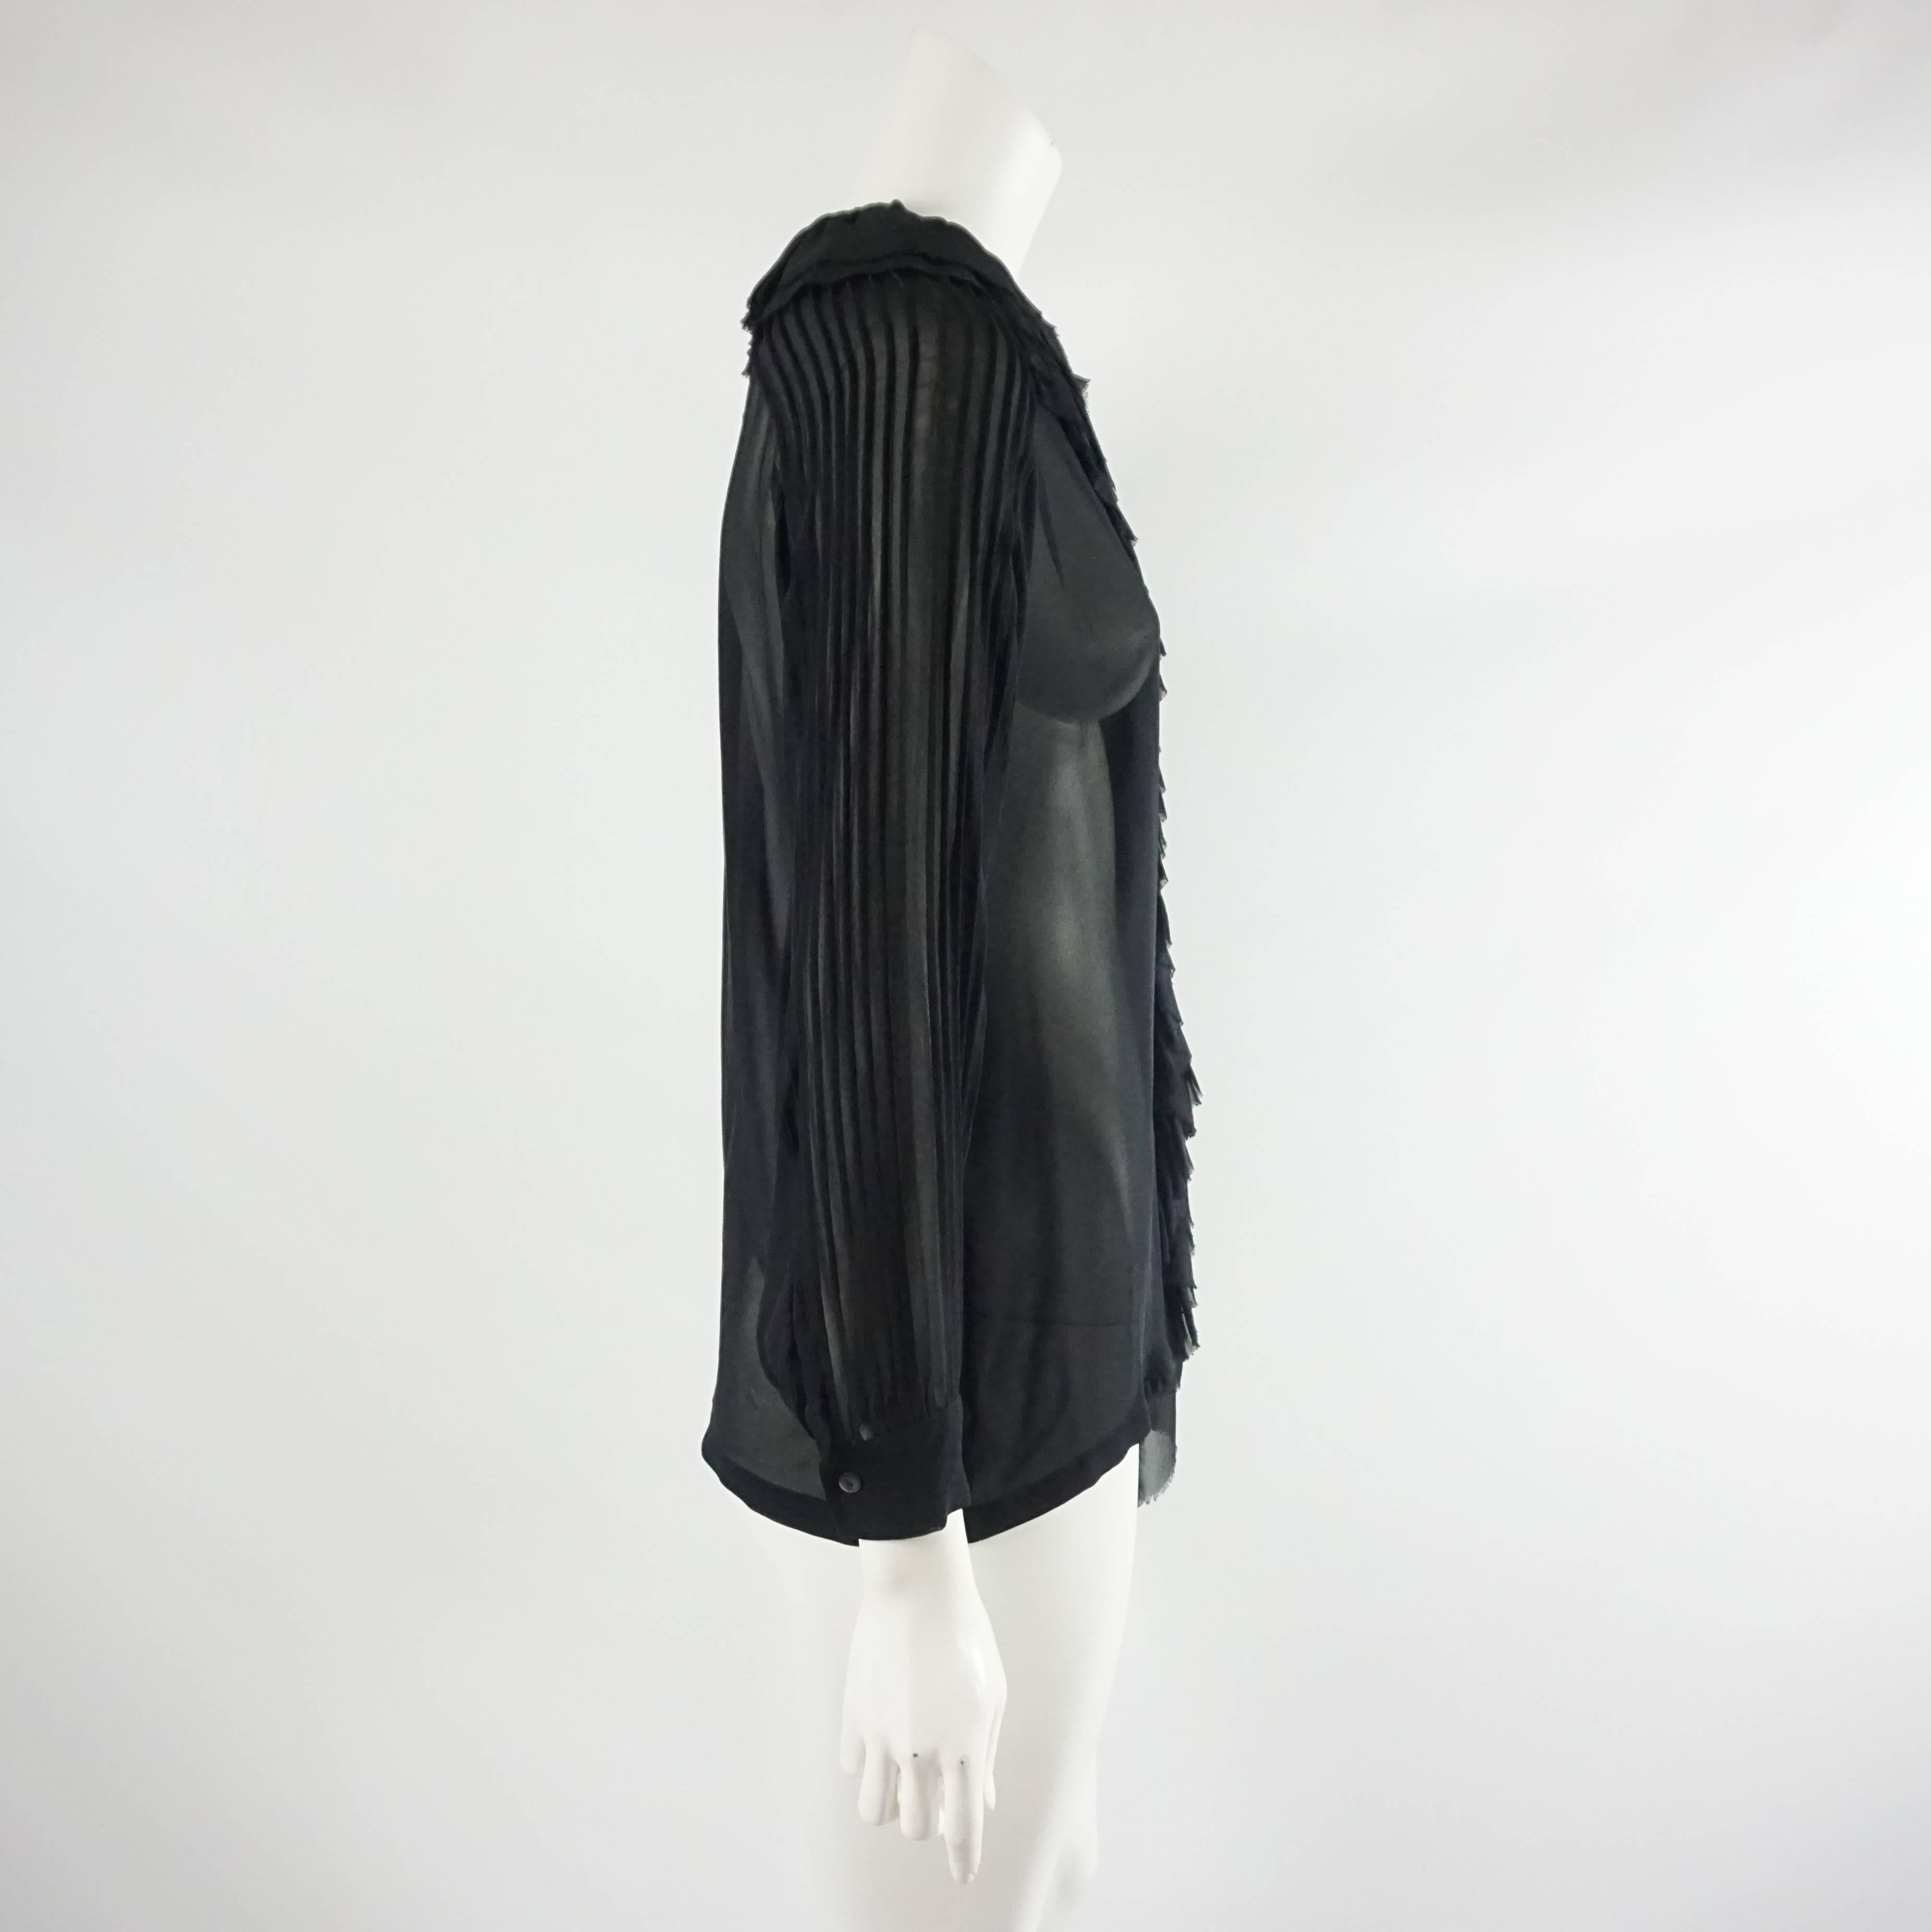 This Dries Van Noten blouse is black and is made of silk chiffon. The top has pleats along the sleeves and ruffles along the neck and the front. It is in excellent condition with minimal wear and no visible wear on fabric. Size 36, circa 21st